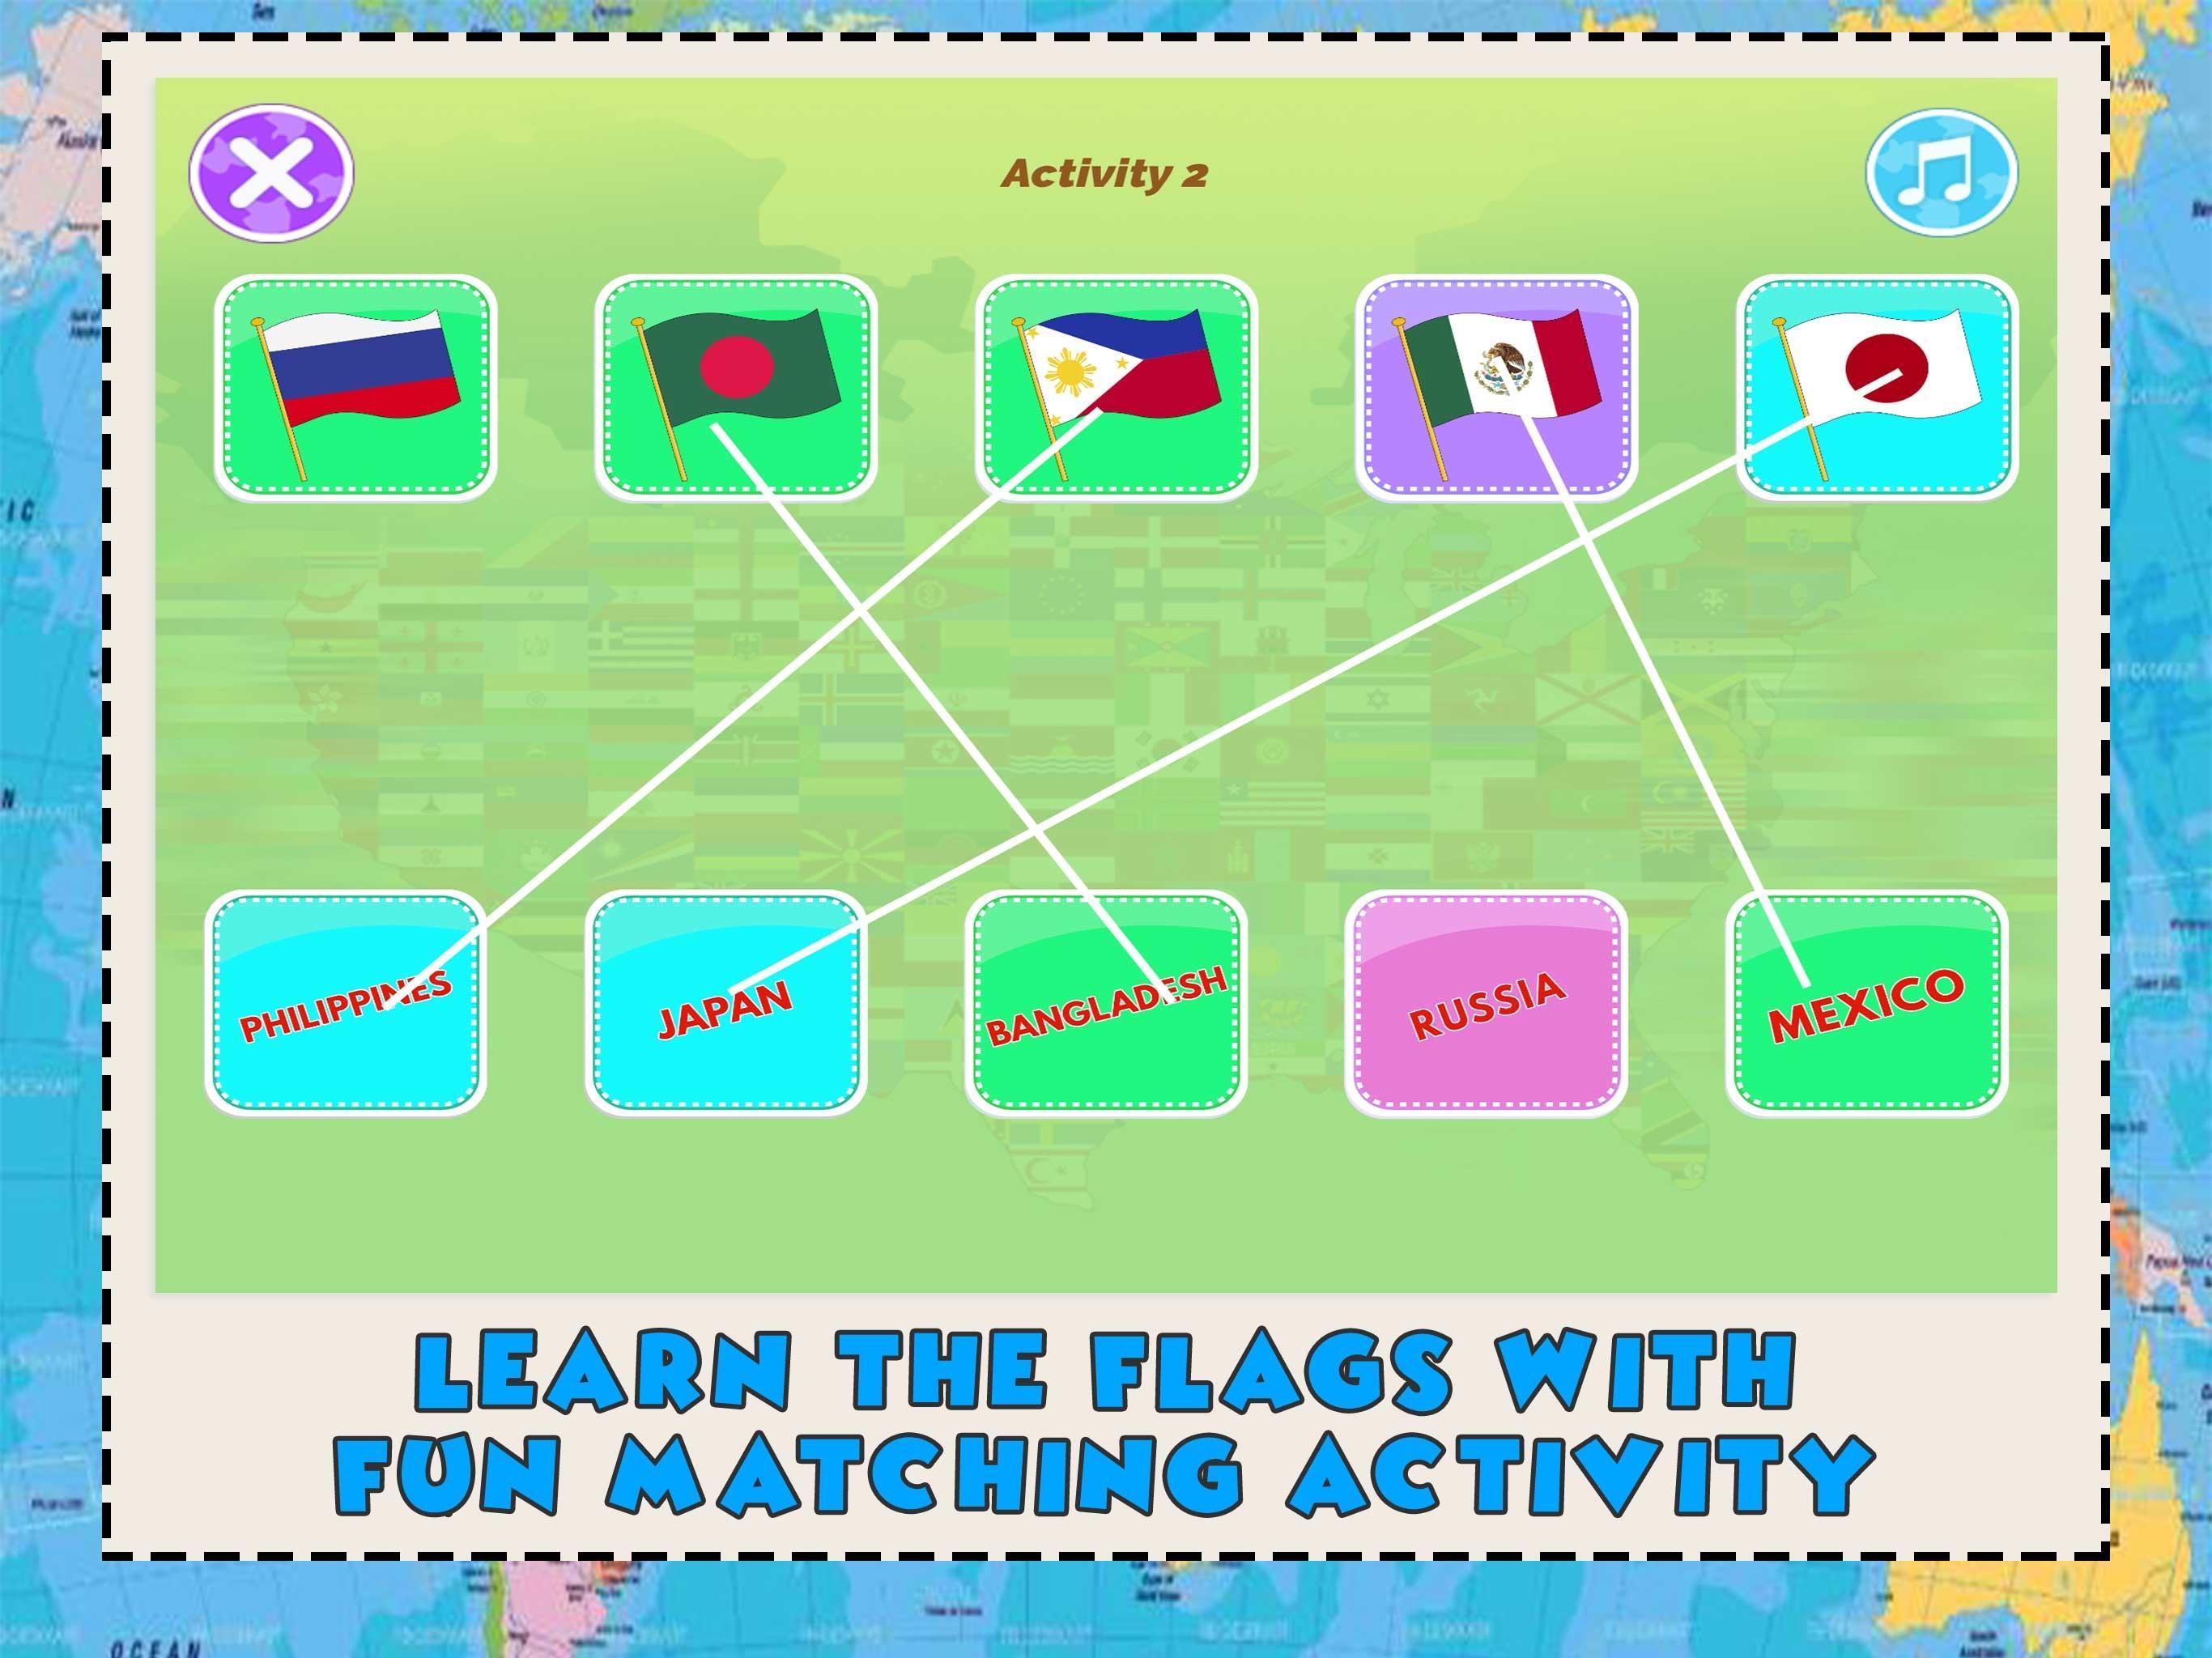 World Geography Games For Kids - Learn Countries 2.5 Screenshot 5